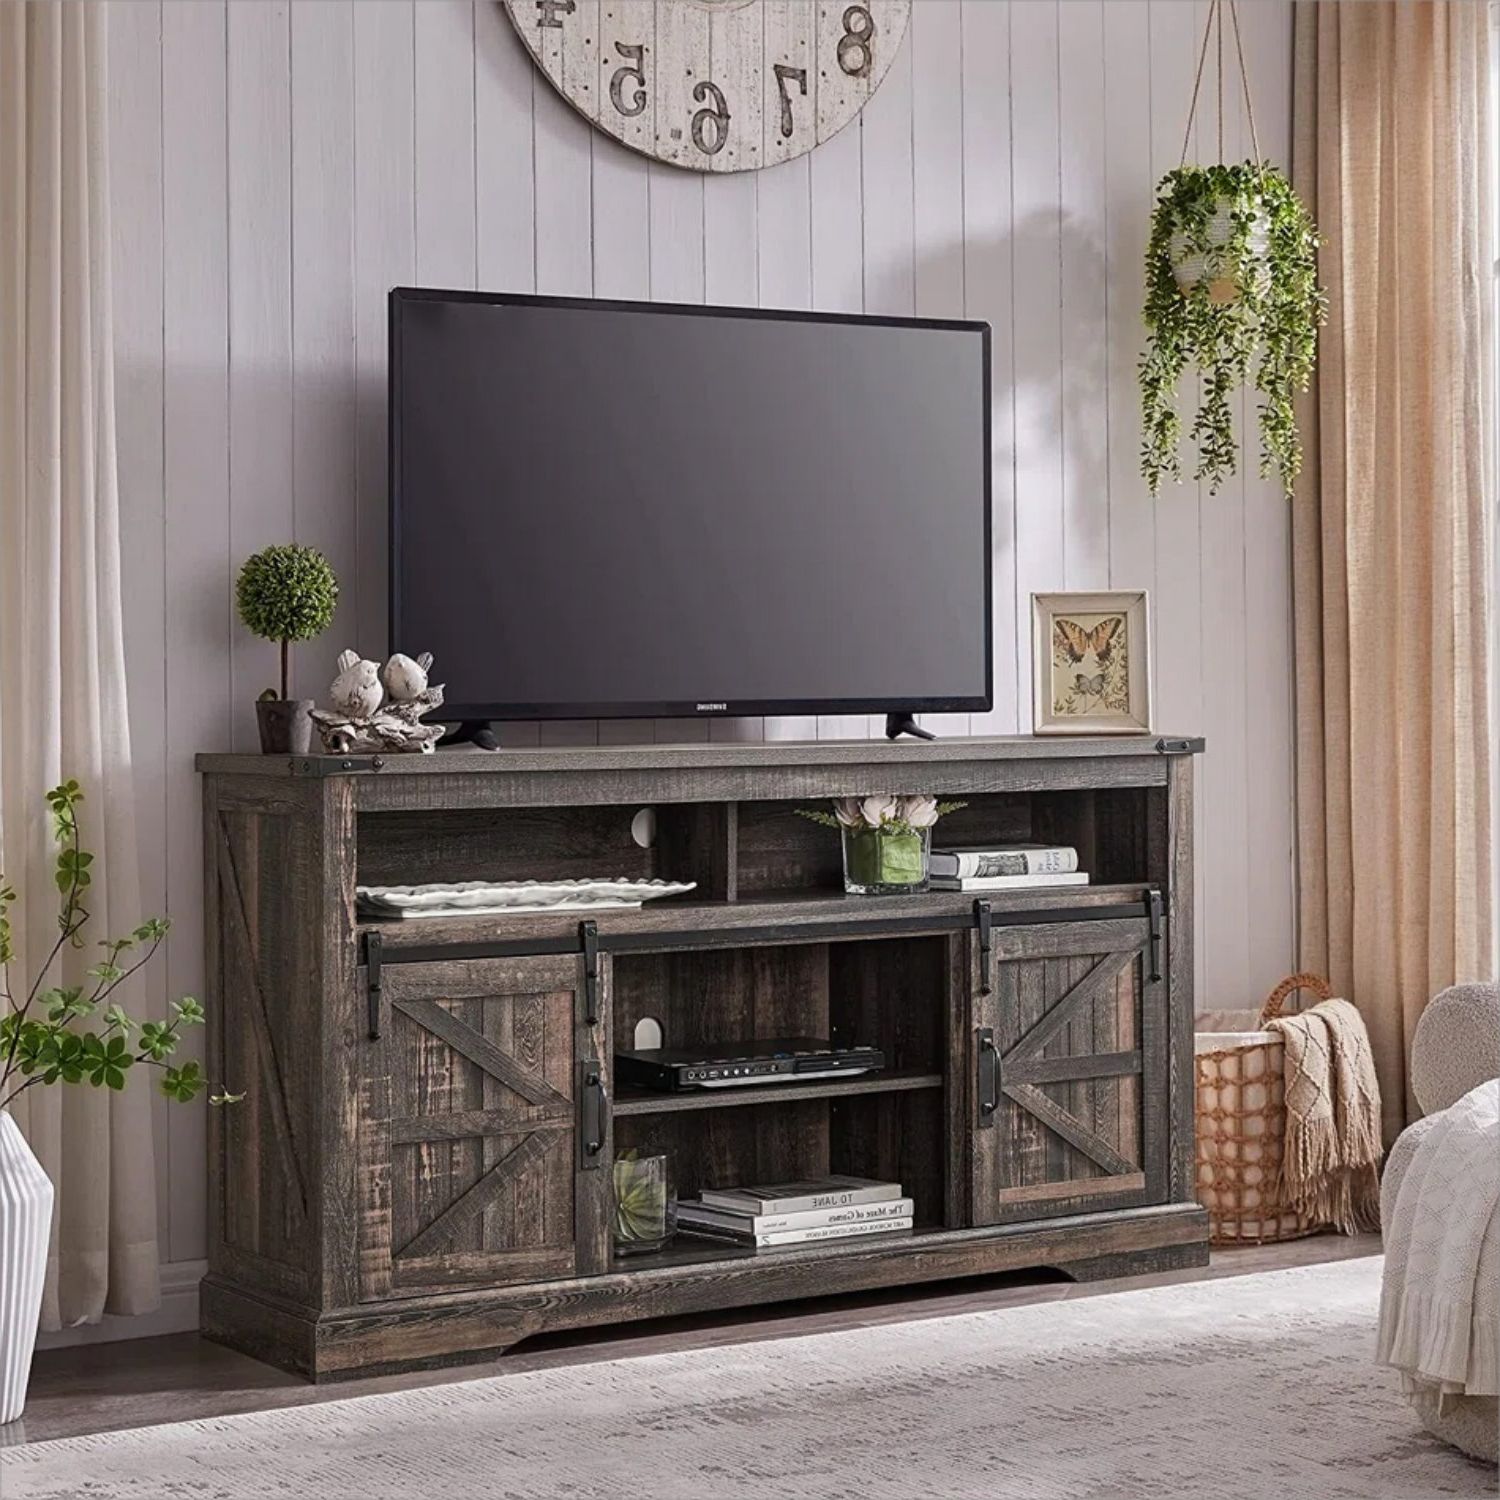 Gracie Oaks Clairessa Farmhouse Tv Stand For 65+ Inch Tv For Living Room,  With Sliding Barn Door & Reviews | Wayfair Throughout Farmhouse Stands For Tvs (View 15 of 20)